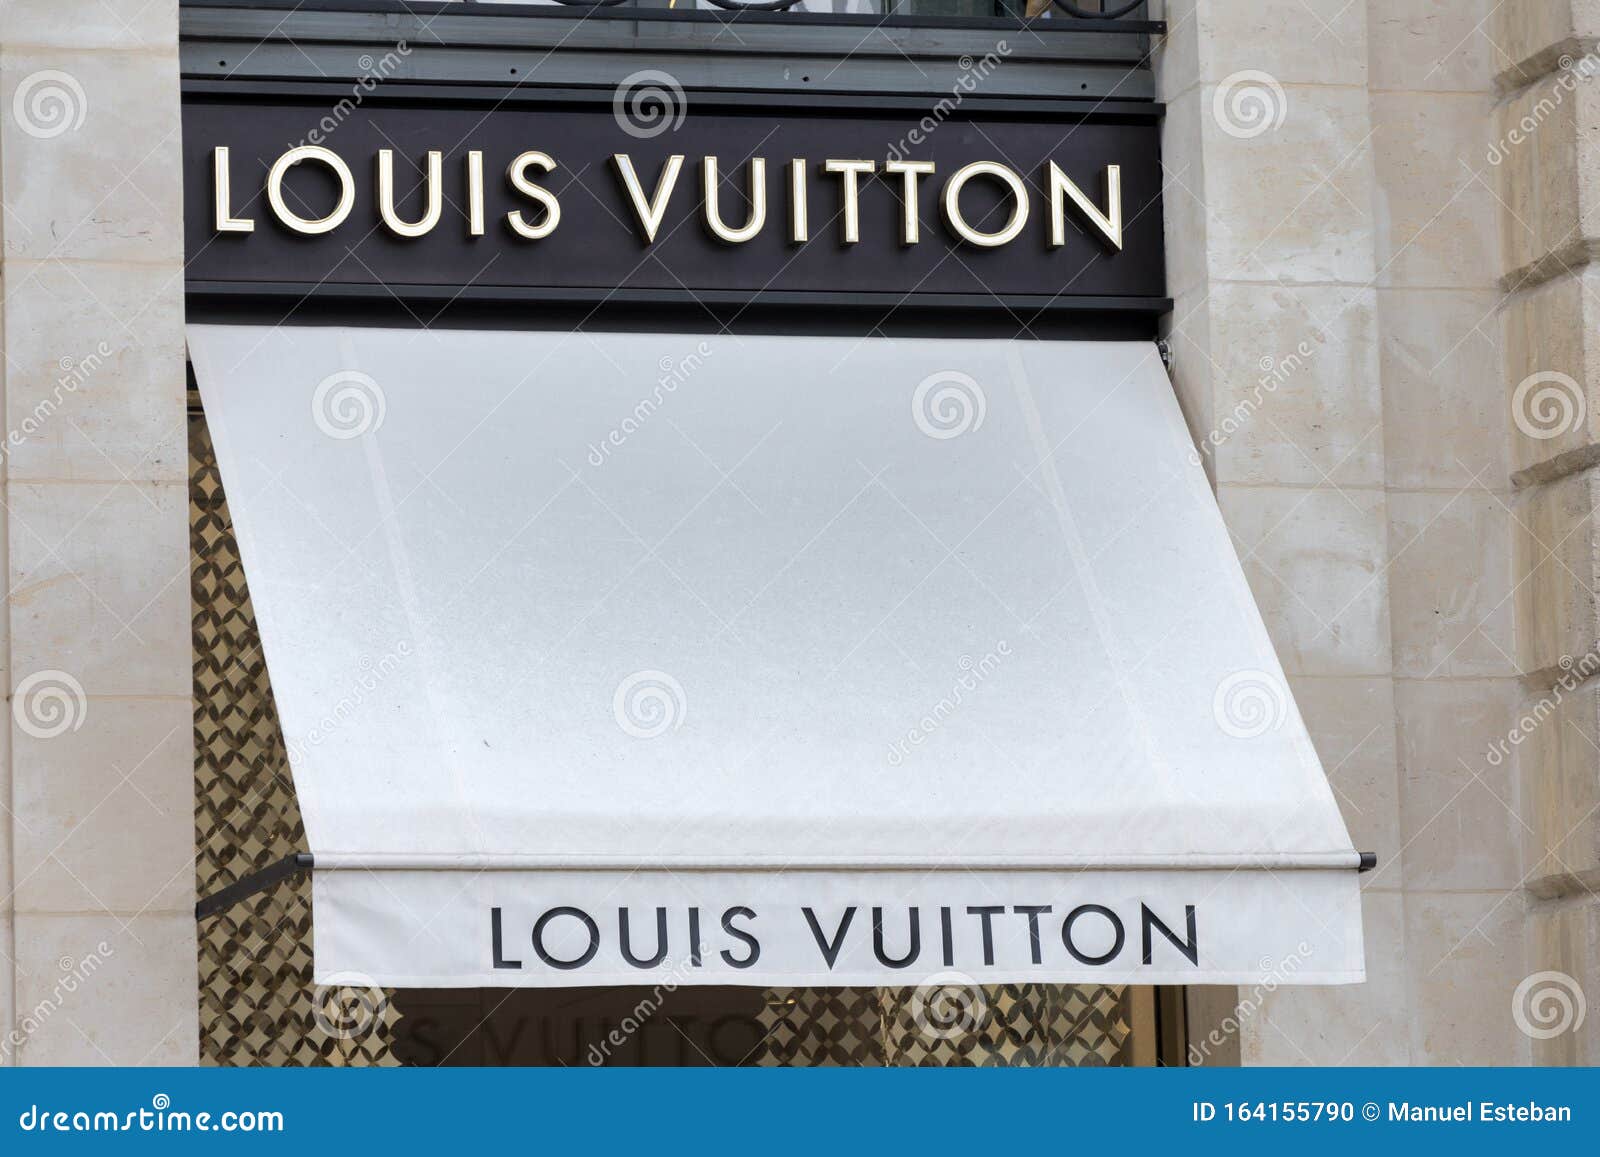 Louis Vuitton Logo On Louis Vuitton`s Shop Editorial Image - Image of outdoors, sell: 164155790